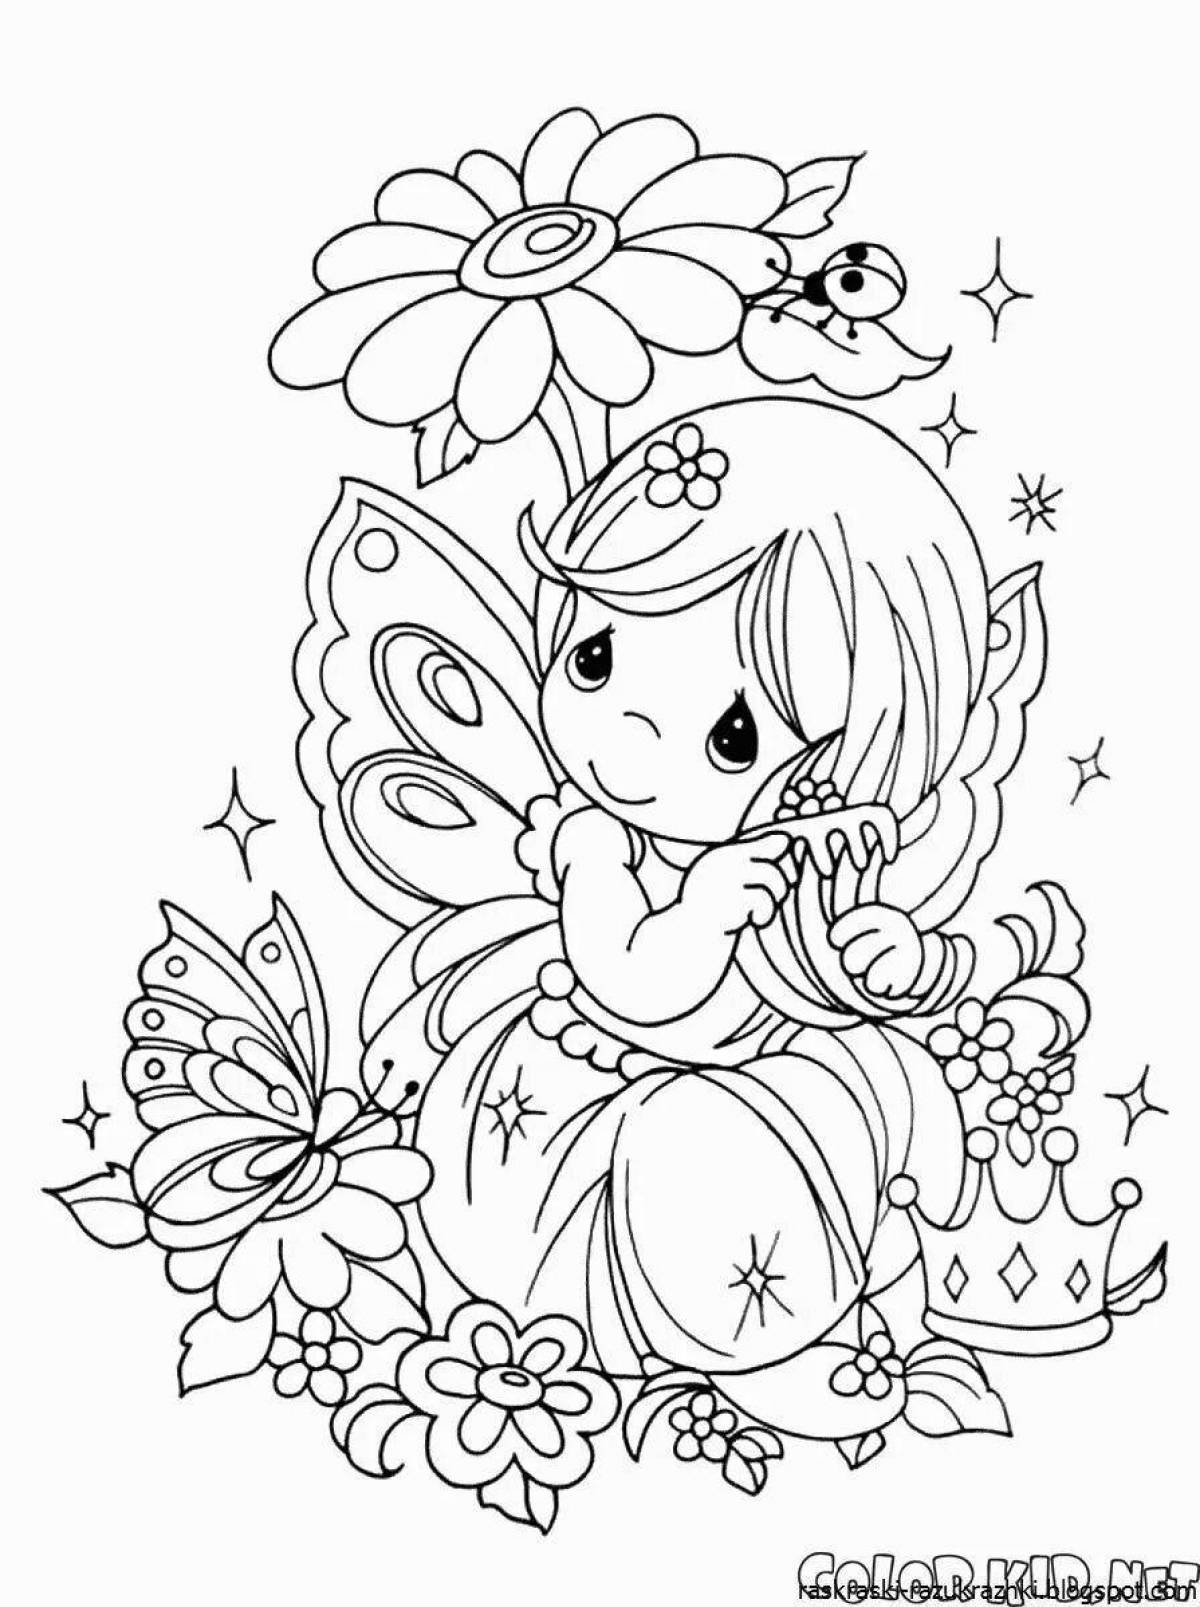 Shining coloring book for girls 7-8 years old